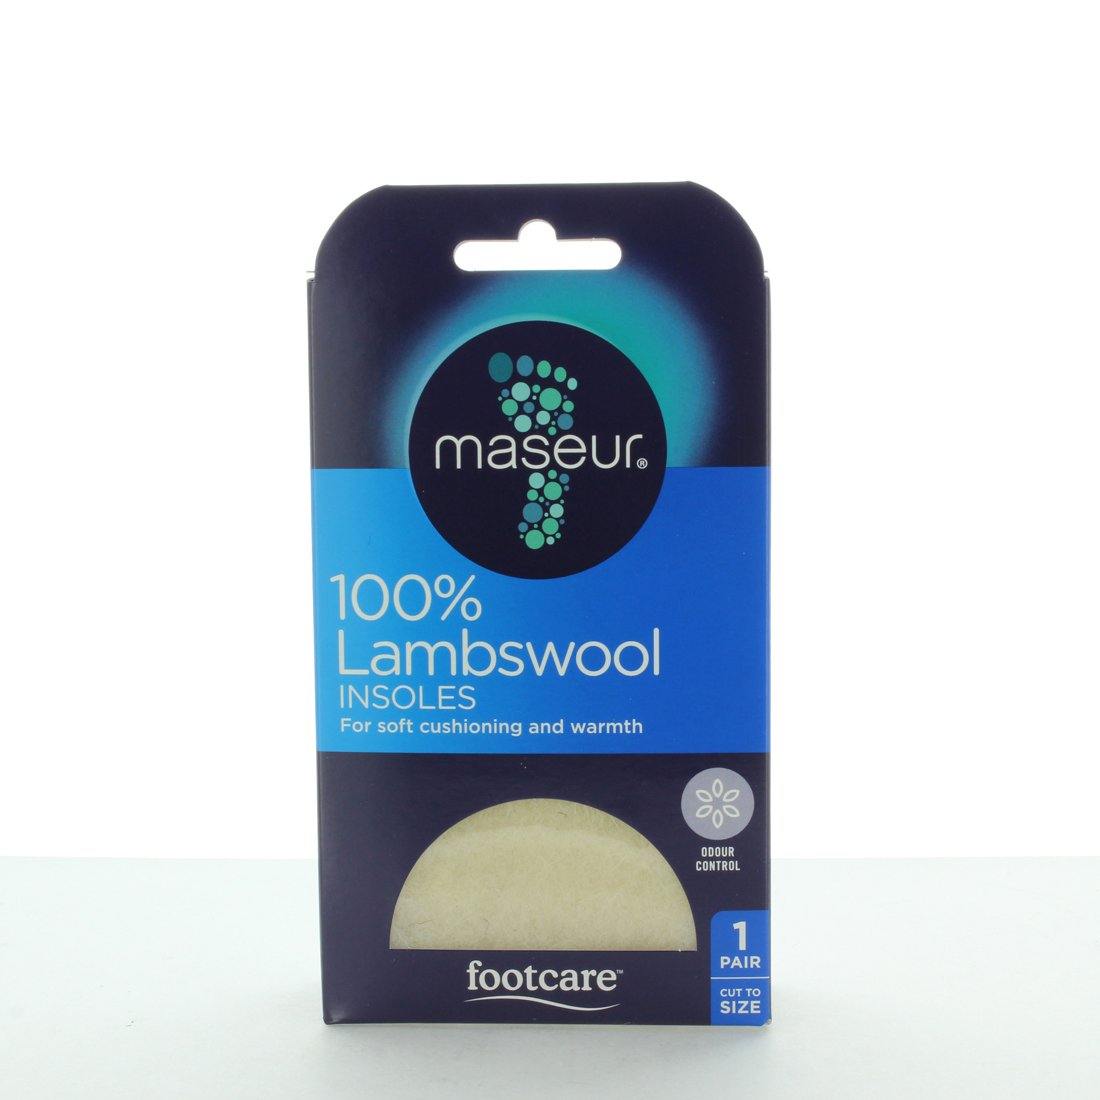 LAMBSWOOL INSOLES by FOOTCARE - iShoes - Accessories, Accessories: Shoe Care - SHOECARE-UNISEX